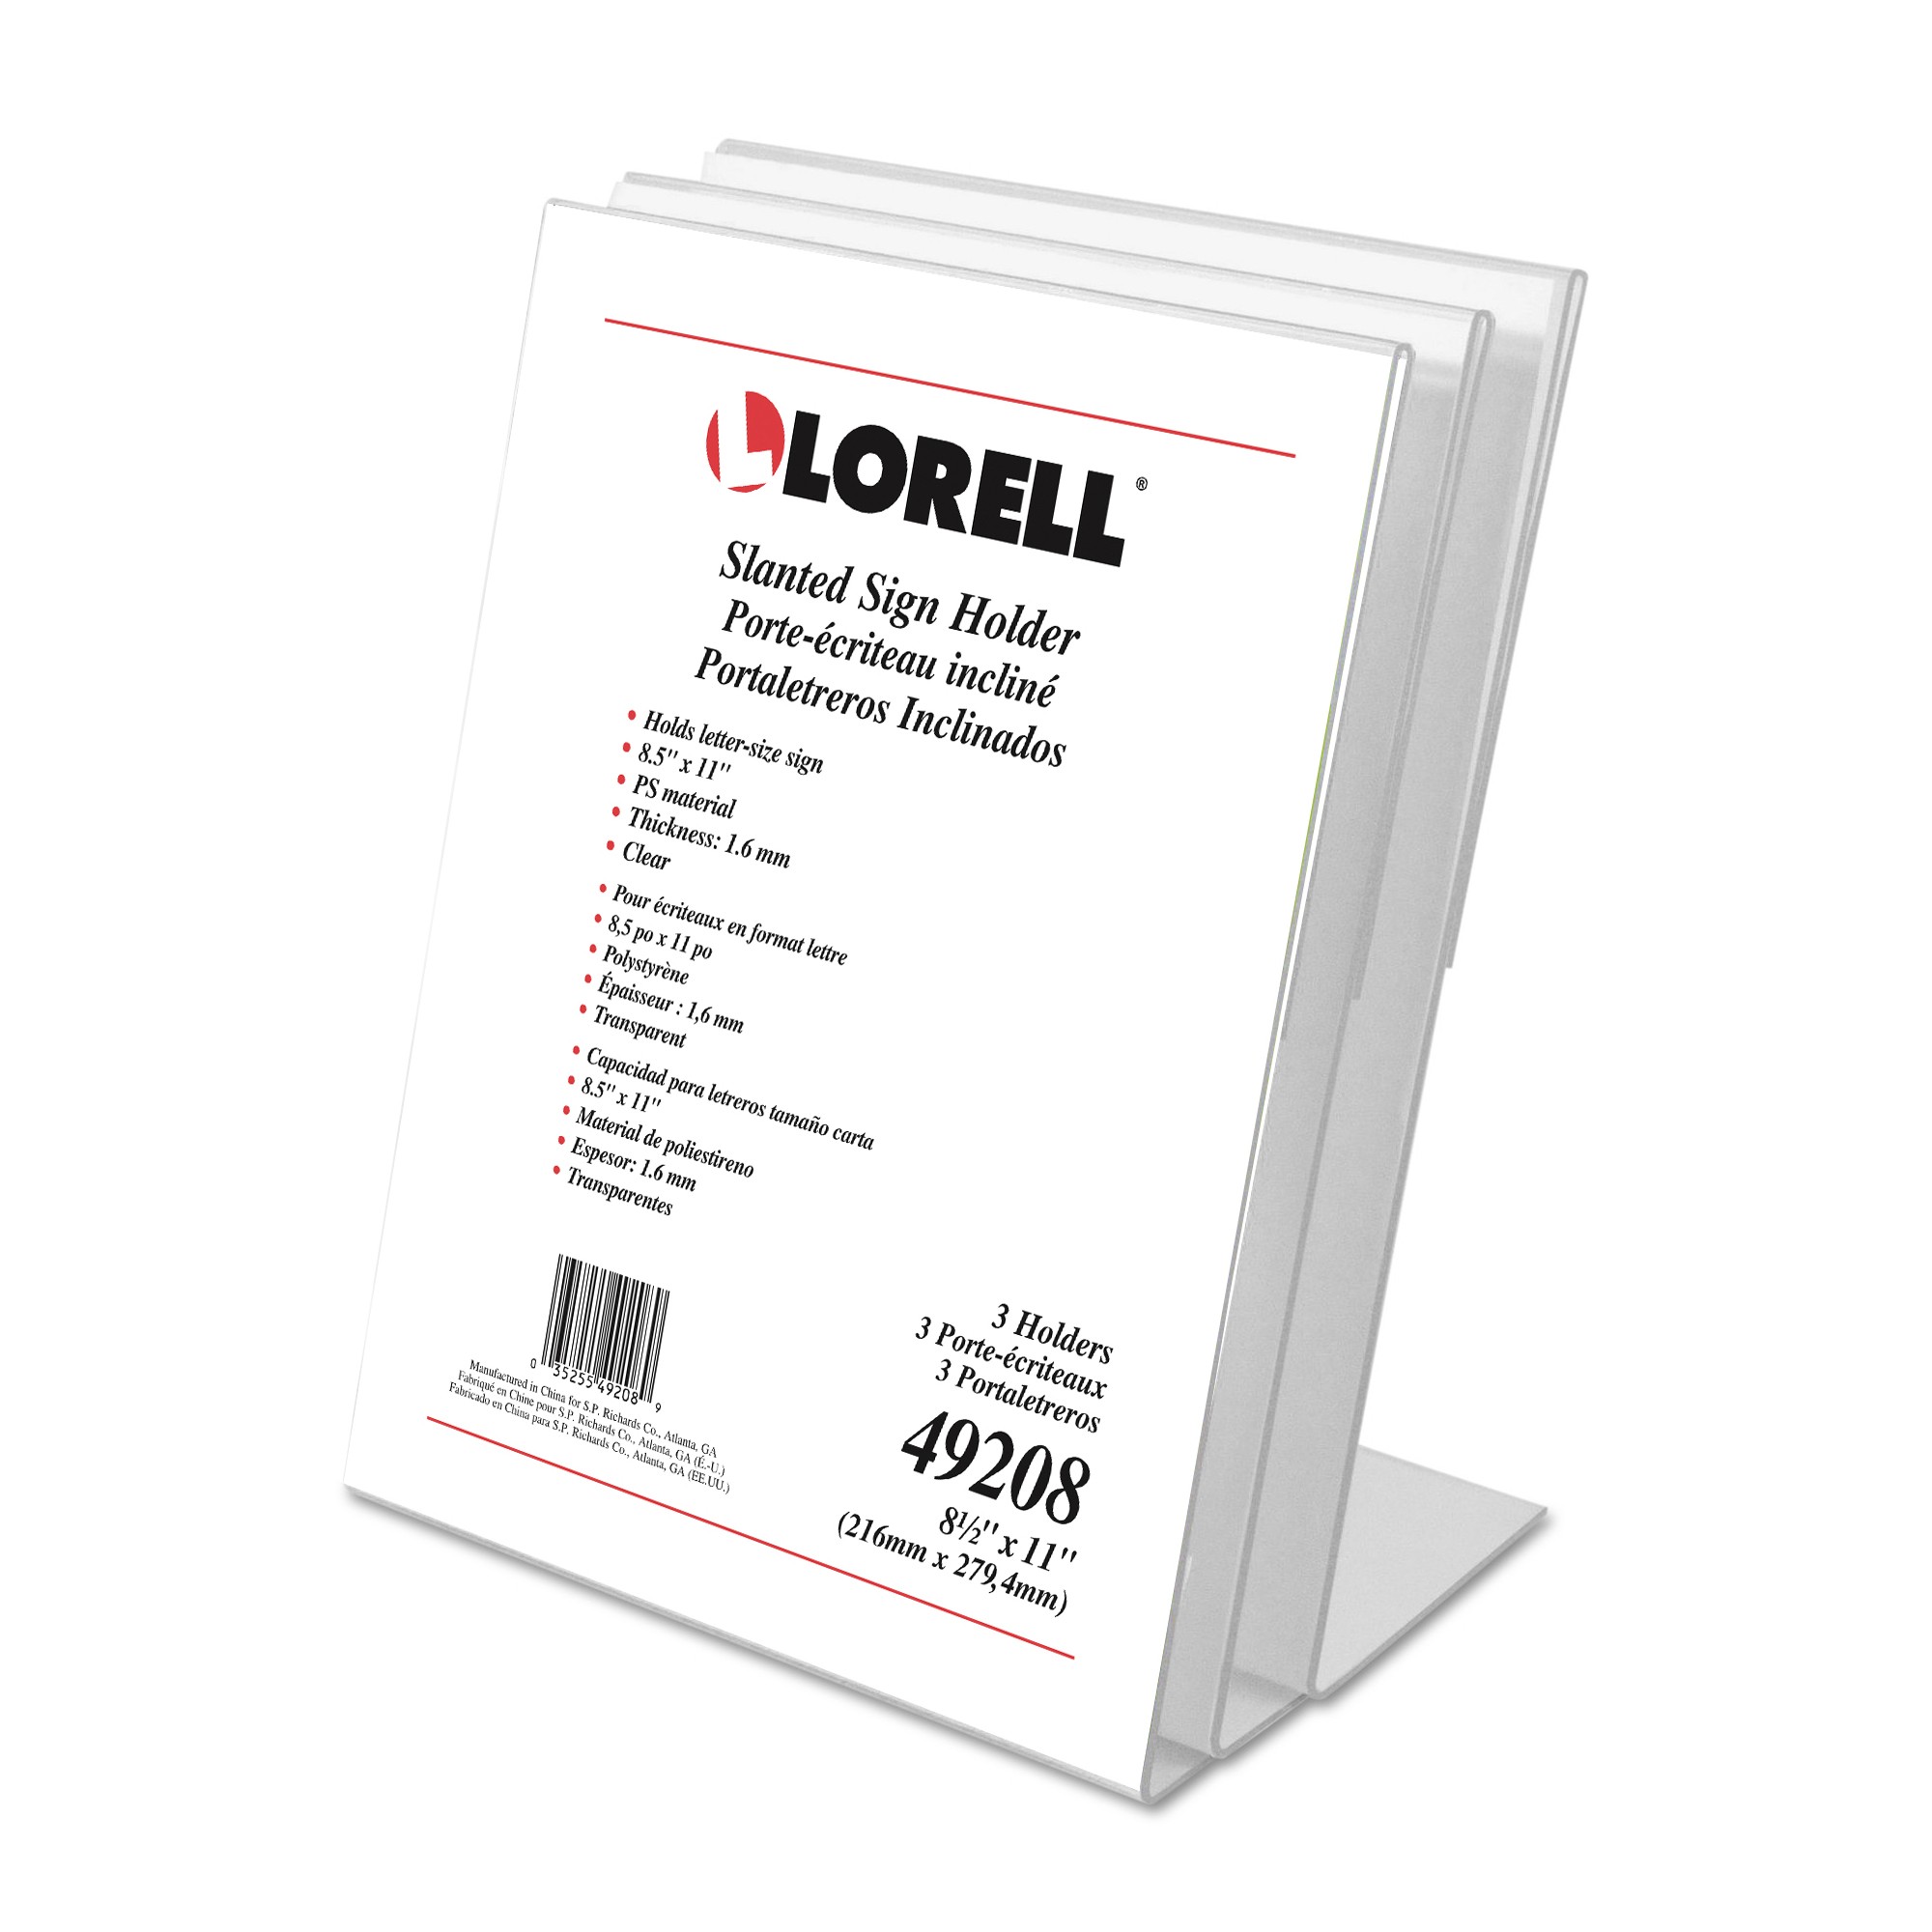 Lorell L-base Slanted Sign Holder Stand Zerbee